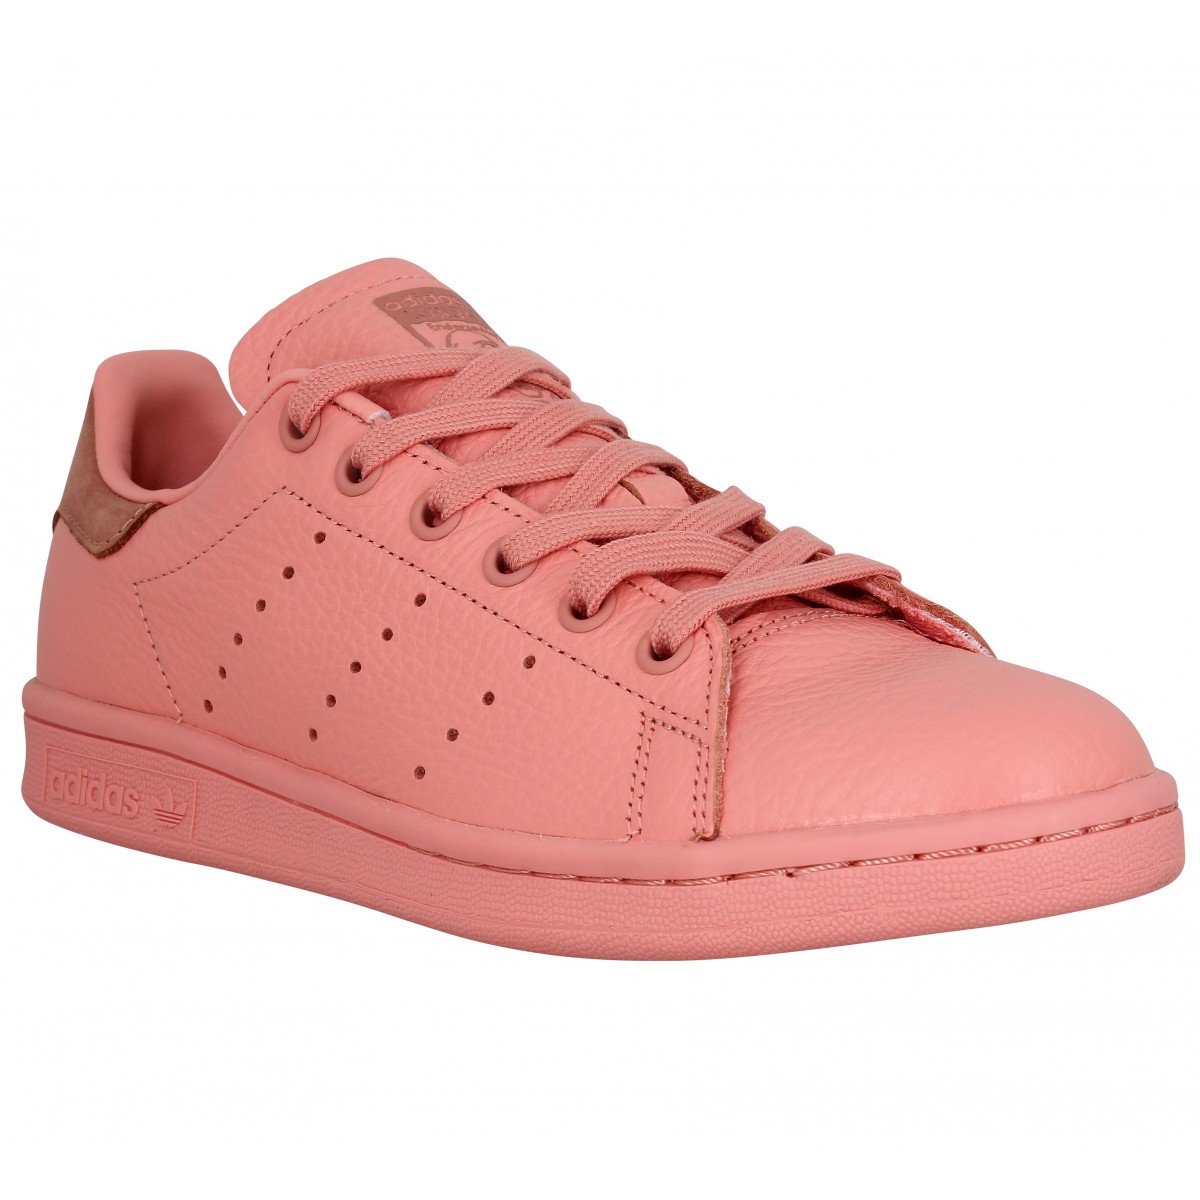 adidas stan smith homme rose